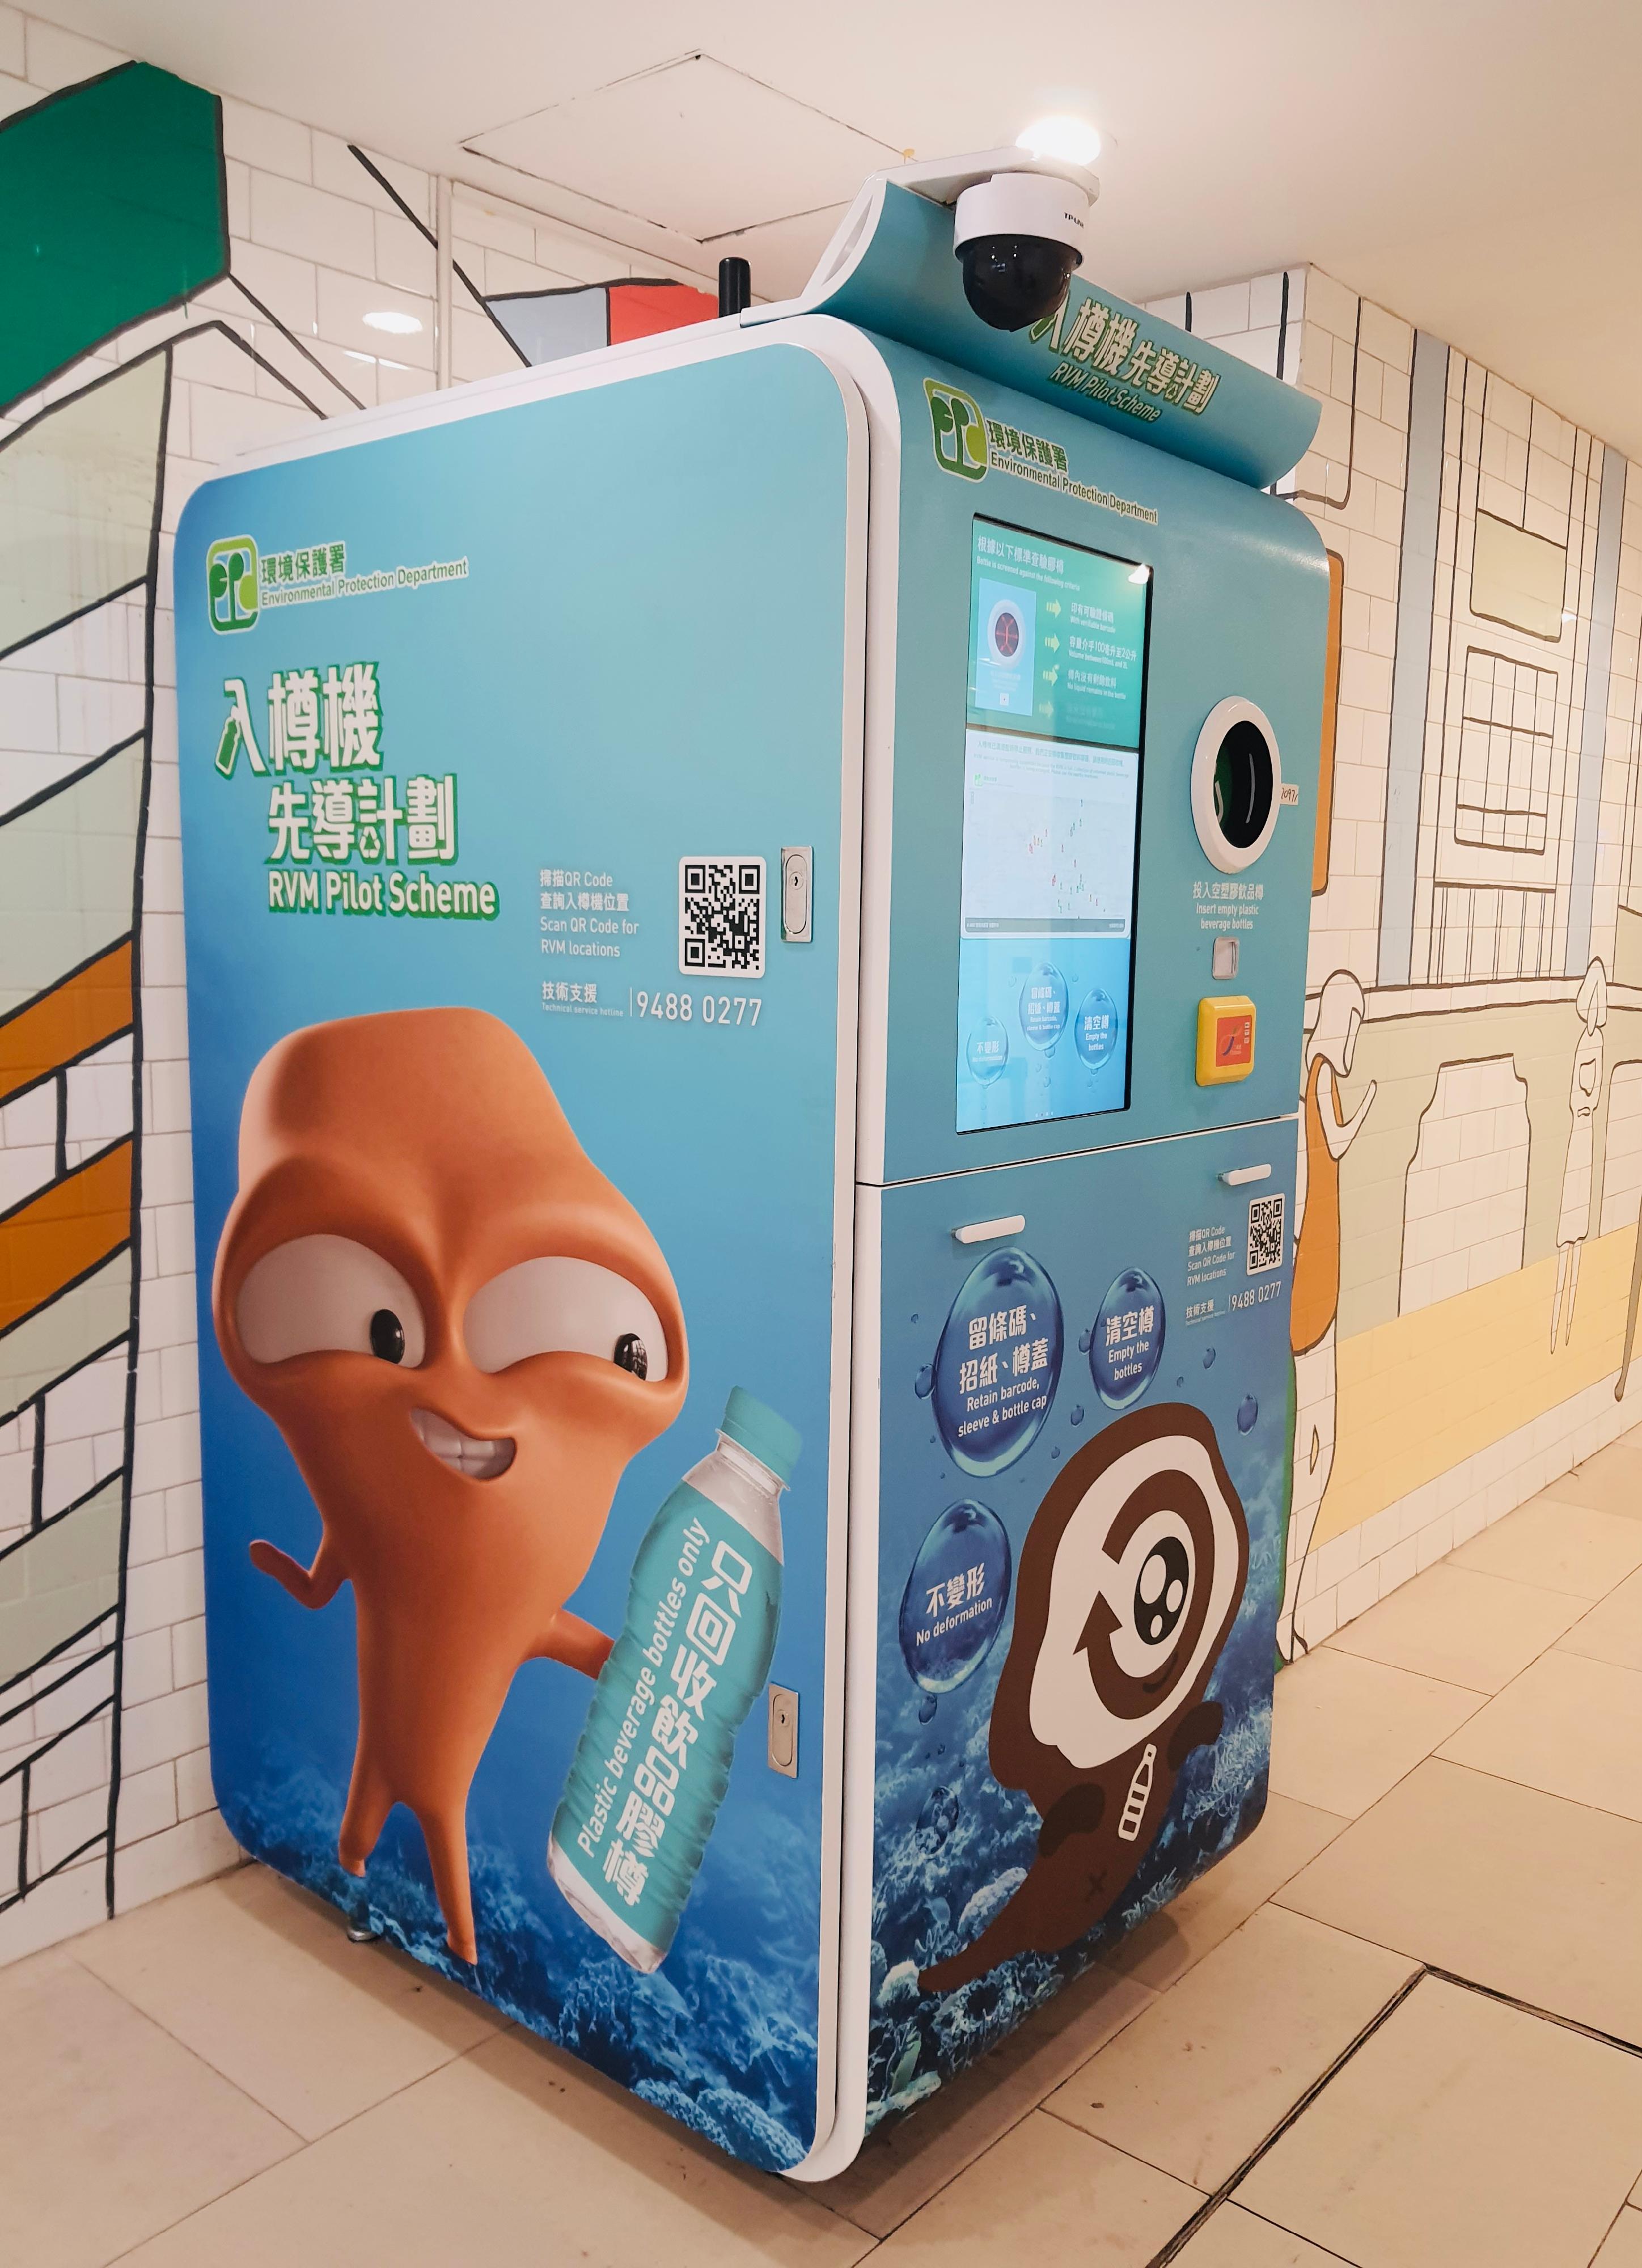 Stage 2 of the Reverse Vending Machine (RVM) Pilot Scheme of the Environmental Protection Department will be launched starting June 25 in phases to further enhance the RVM service, enabling more members of the public to participate in making use of smart RVMs for clean recycling of plastic beverage containers.